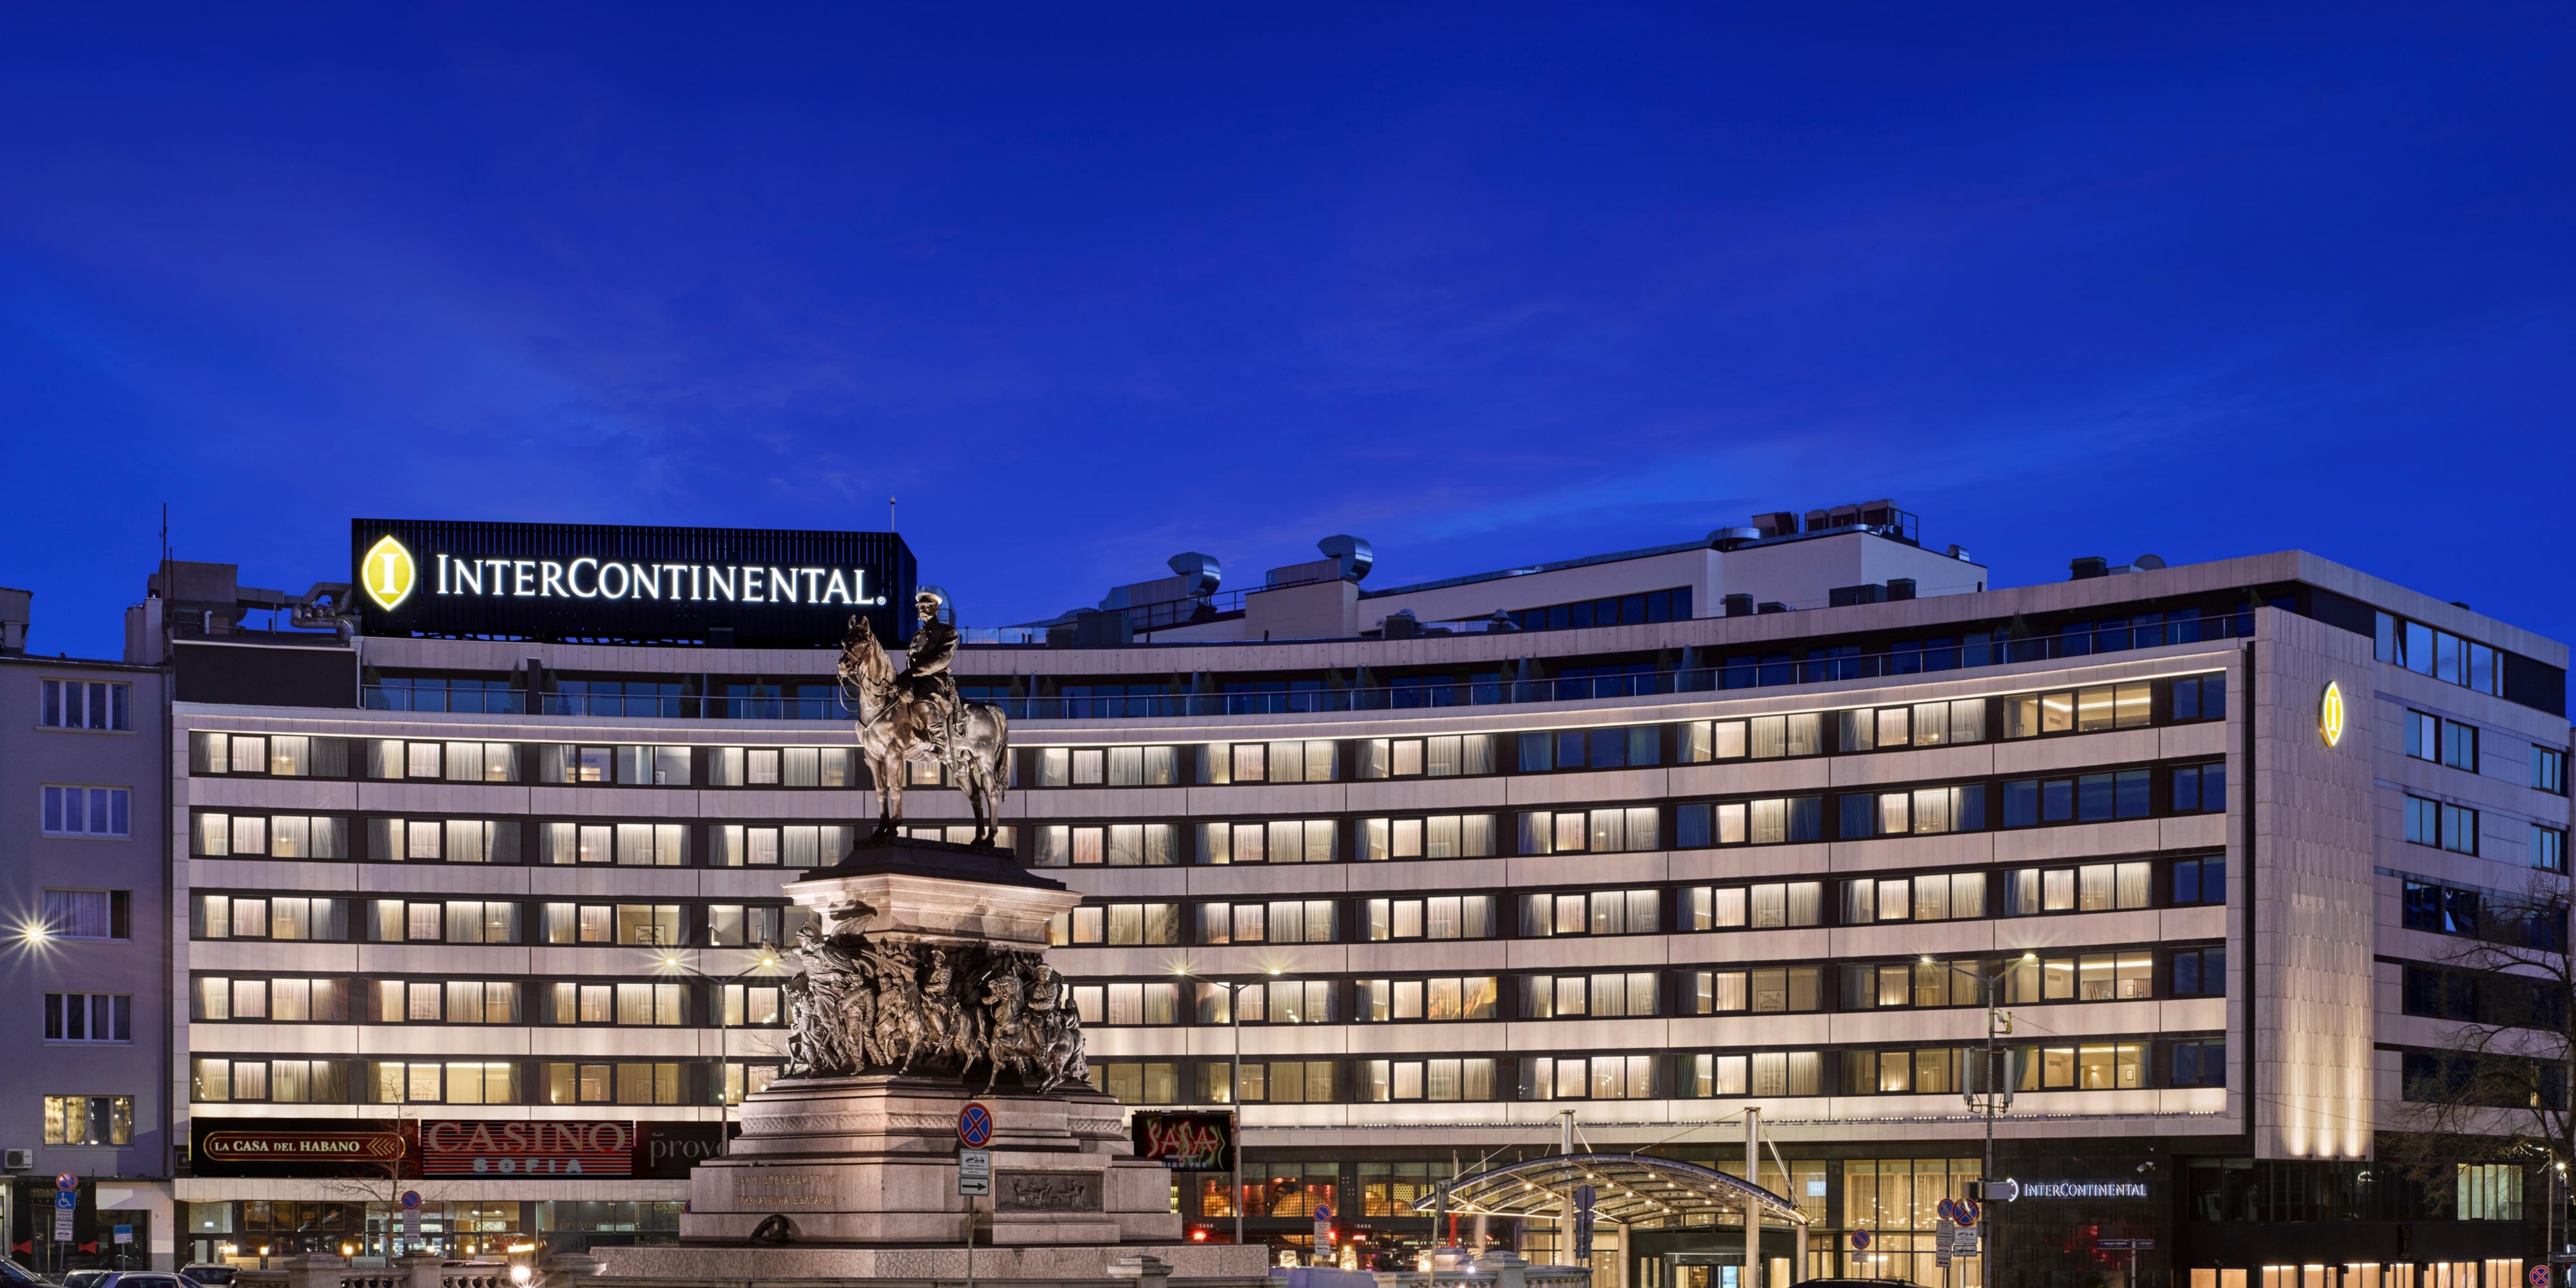 Only three years after its opening, InterContinental Sofia is a proud winner of numerous local and international awards and recognitions, including Leading New Hotel in Europe for 2019, Leading Hotel in Bulgaria for 2020, and Best Luxury Business Hotel for Eastern Europe for 2020. 